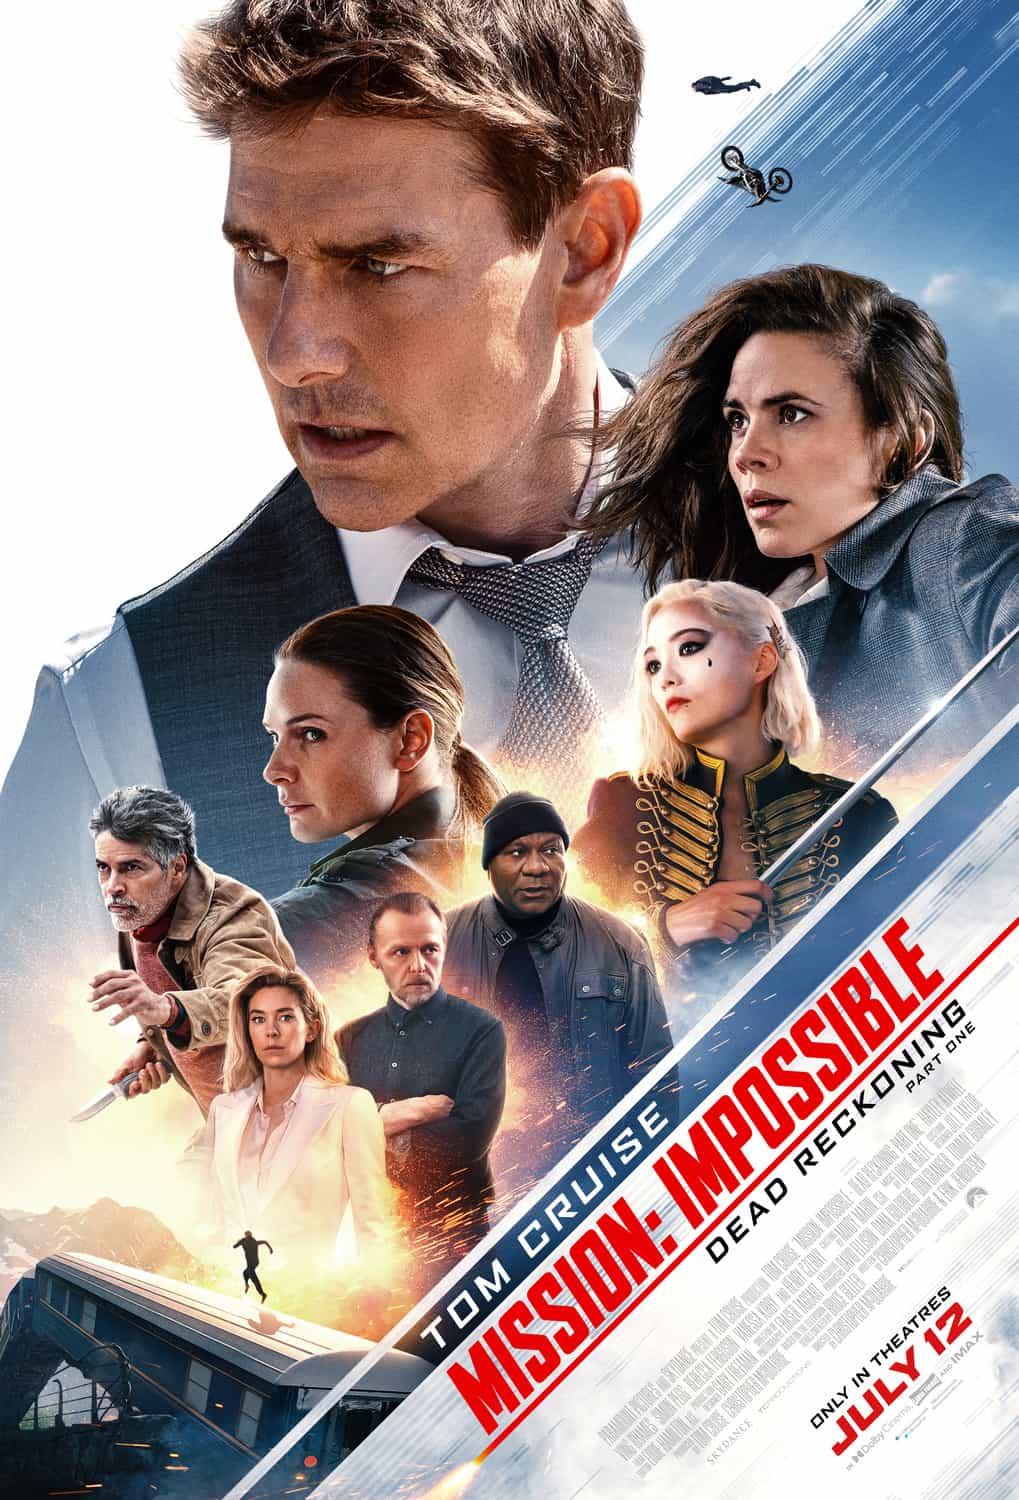 UK Box Office Weekend Report 14th - 16th July 2023:  Tom Cruise with is Mission Impossible team take over at the top of the UK box office with over £10 Million debut gross